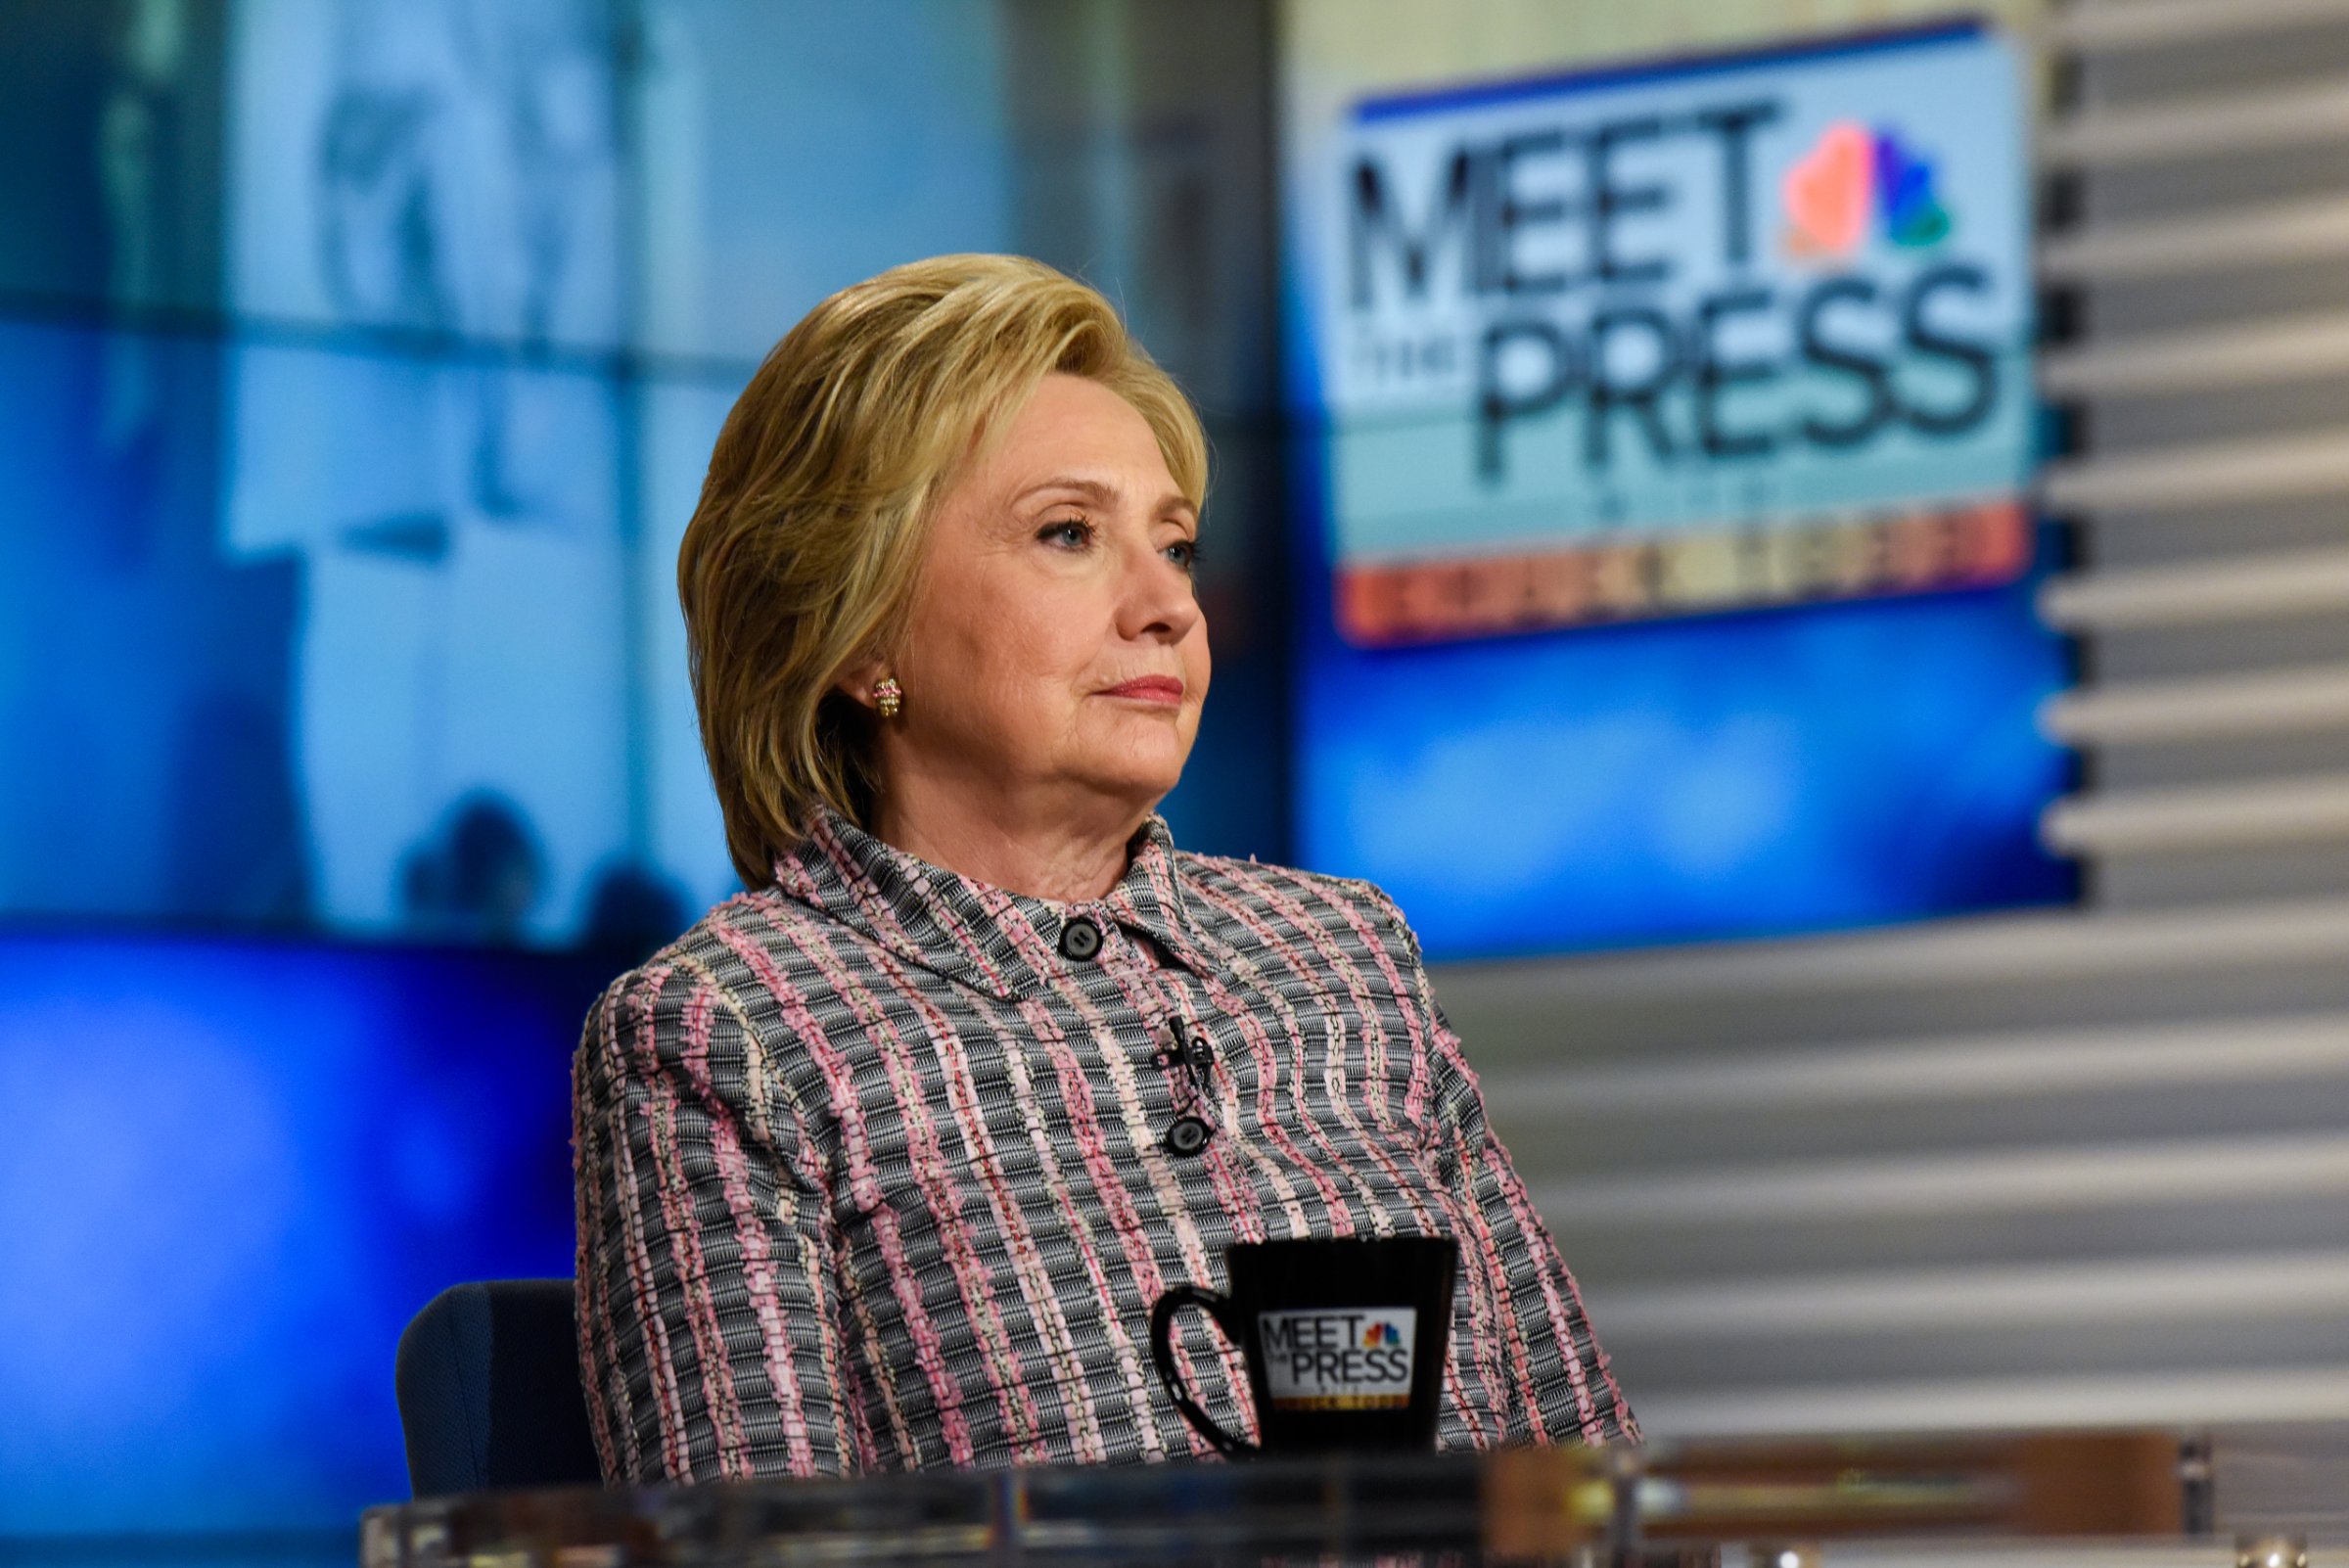 MEET THE PRESS -- Pictured: (l-r) Presidential Candidate, Former Sec. Hillary Clinton appears in a pre-taped interview on "Meet the Press" in Washington, D.C., Saturday May 21, 2016. (Photo by: William B. Plowman/NBC/NBC NewsWire via Getty Images)